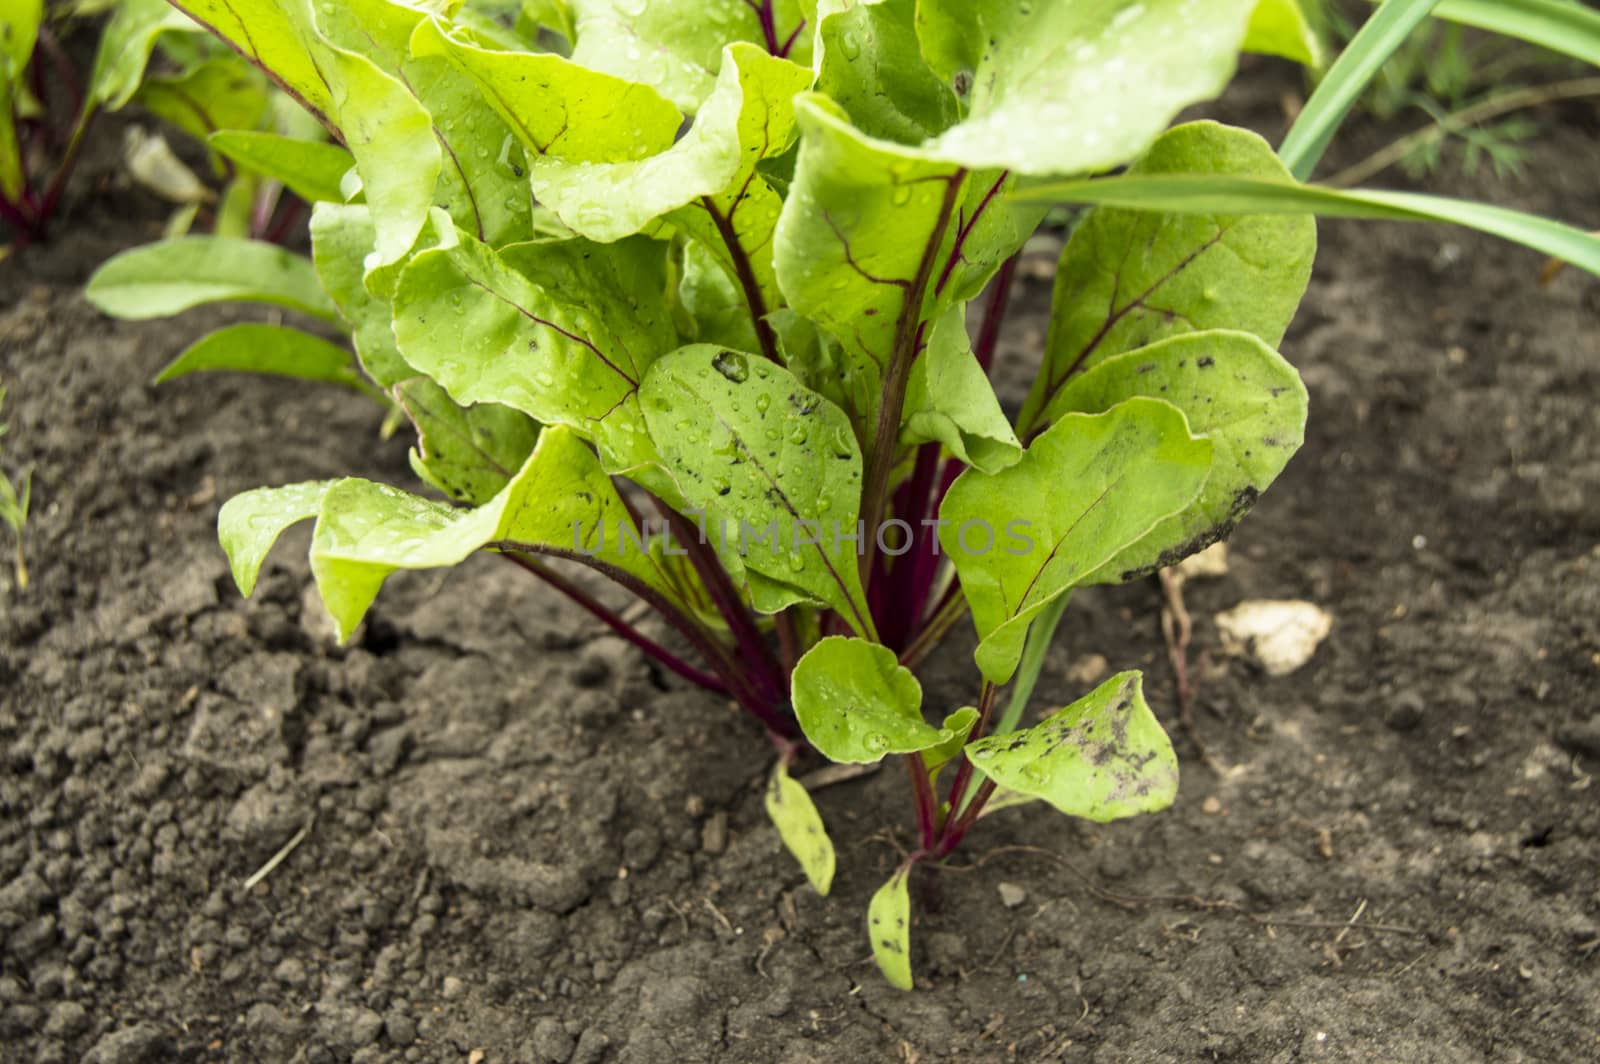 Beet grows in the garden, young beet leaves in drops of water after watering, the concept of growing organic products.